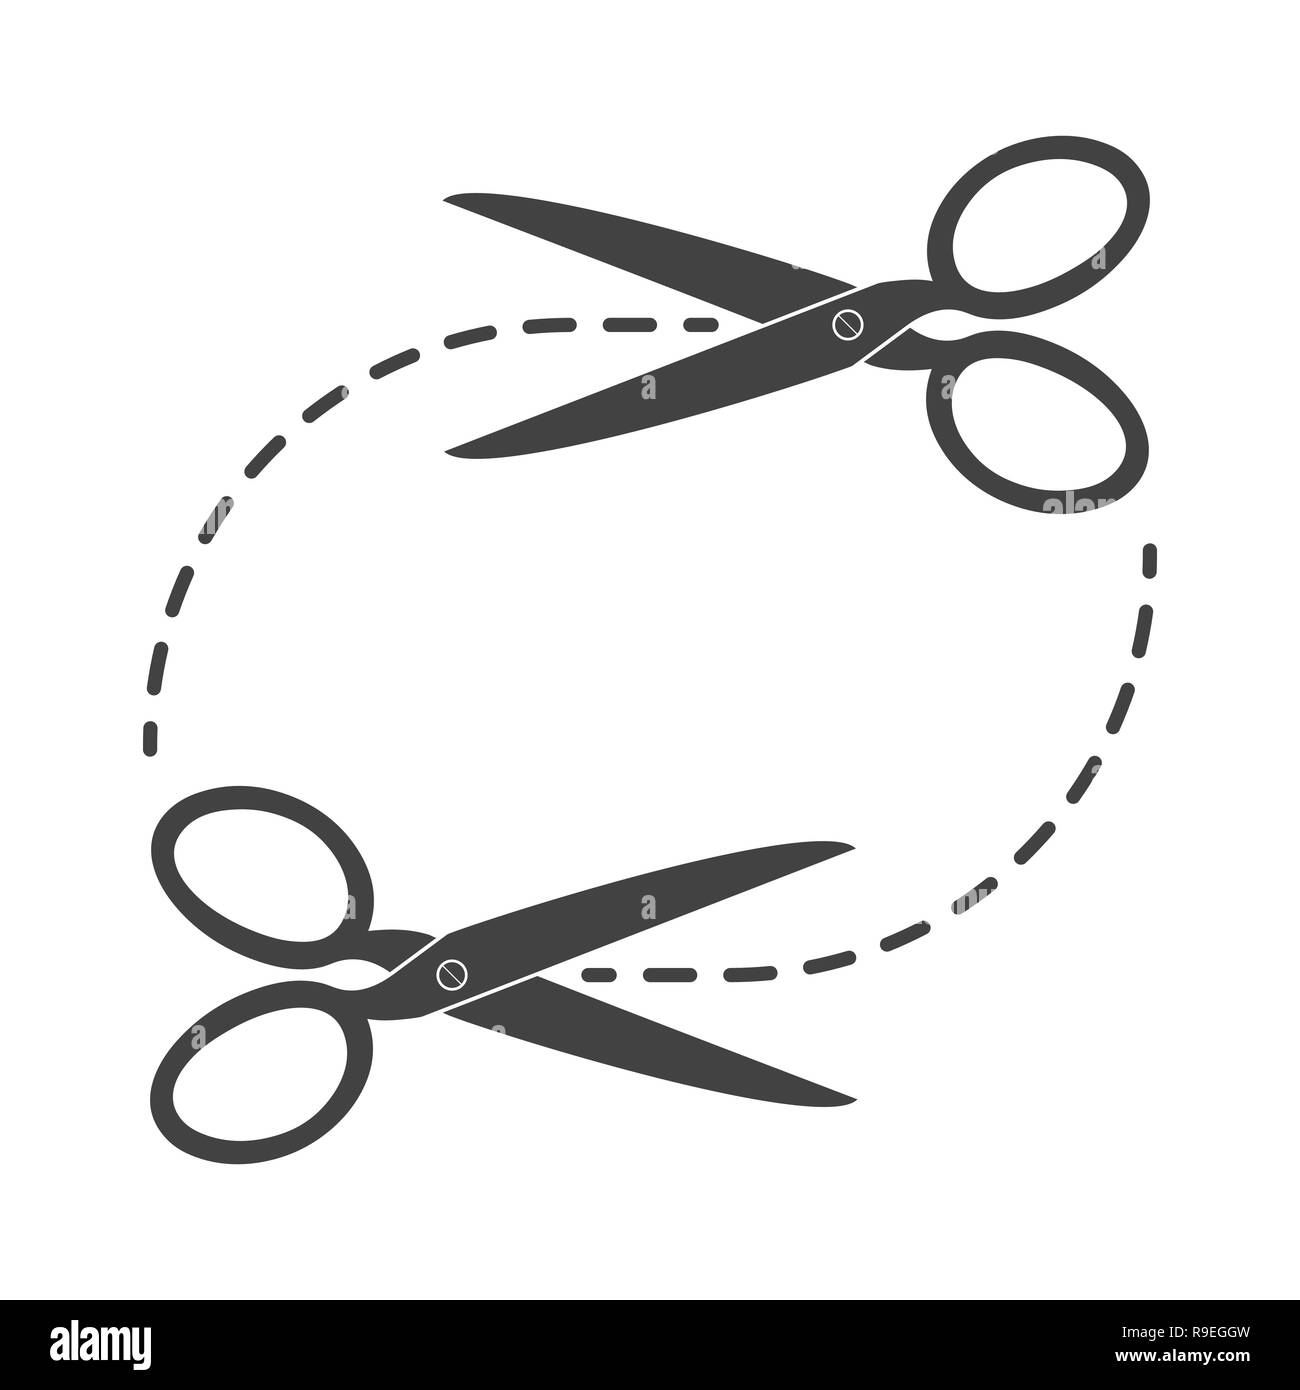 Scissors with cut lines. Vector illustration. Coupon border with scissors Stock Vector